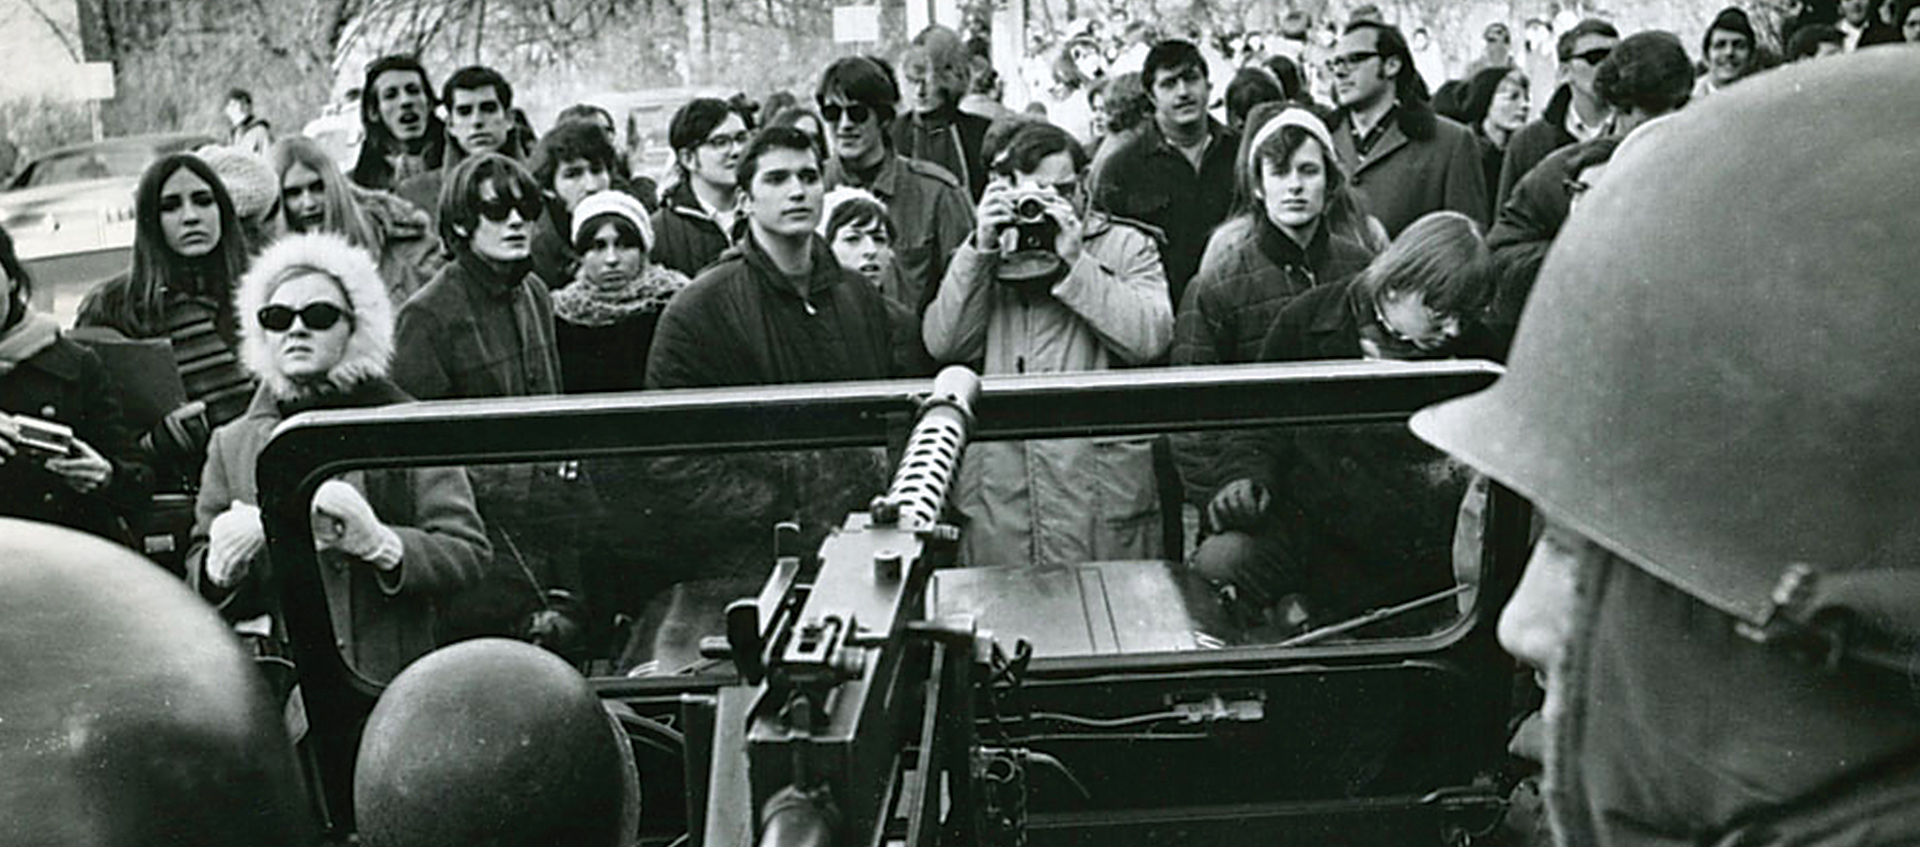 A crowd of protestors stand in front of a jeep carrying soldiers